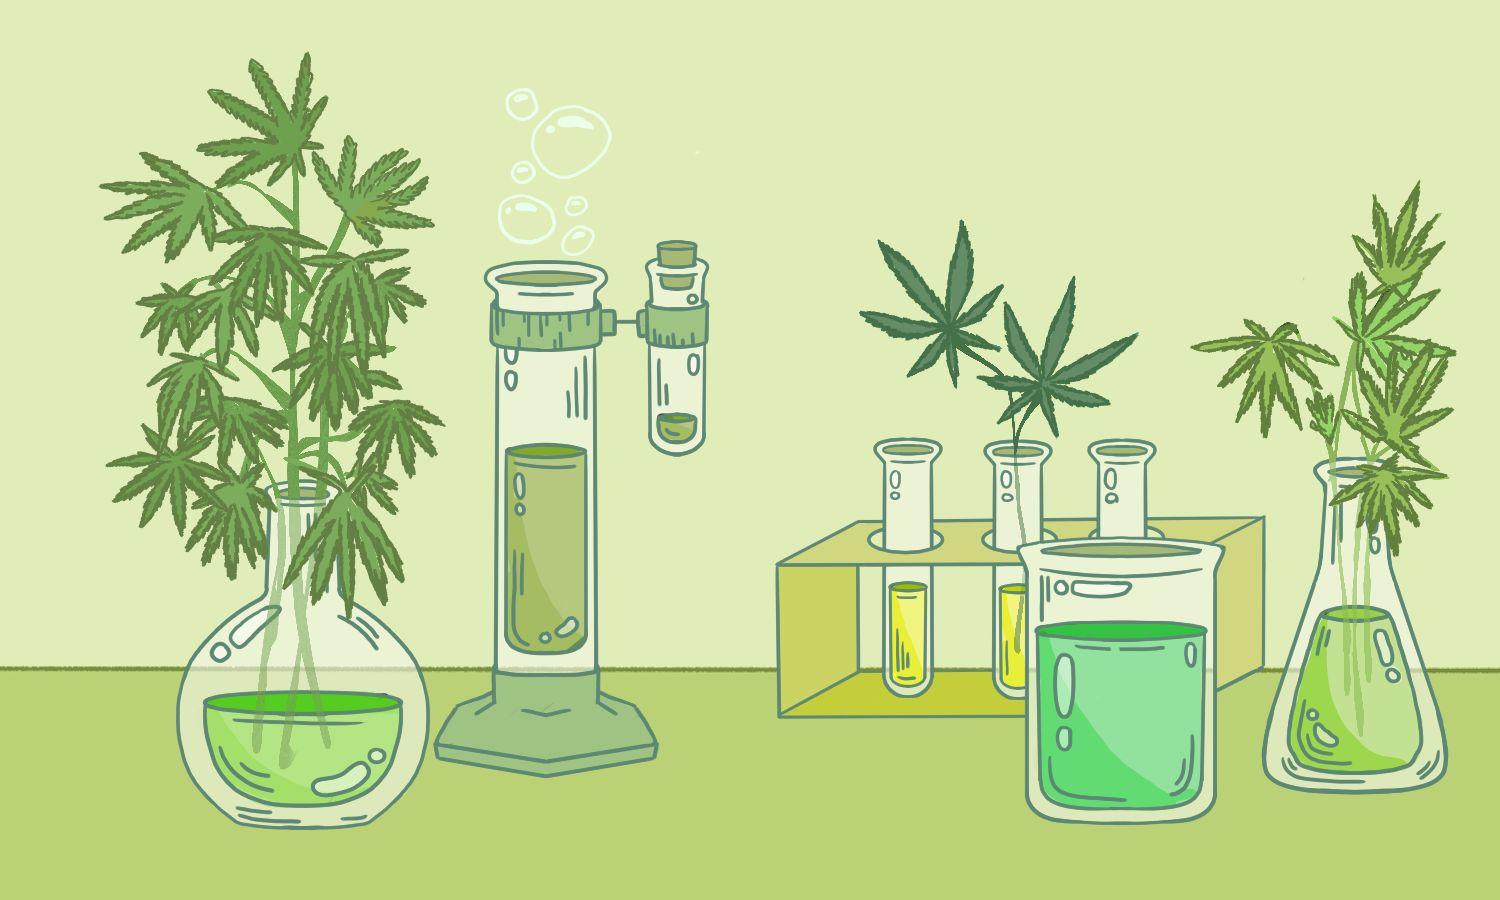 Illustration showing various test tubes and beakers with cannabis leaves growing out of them